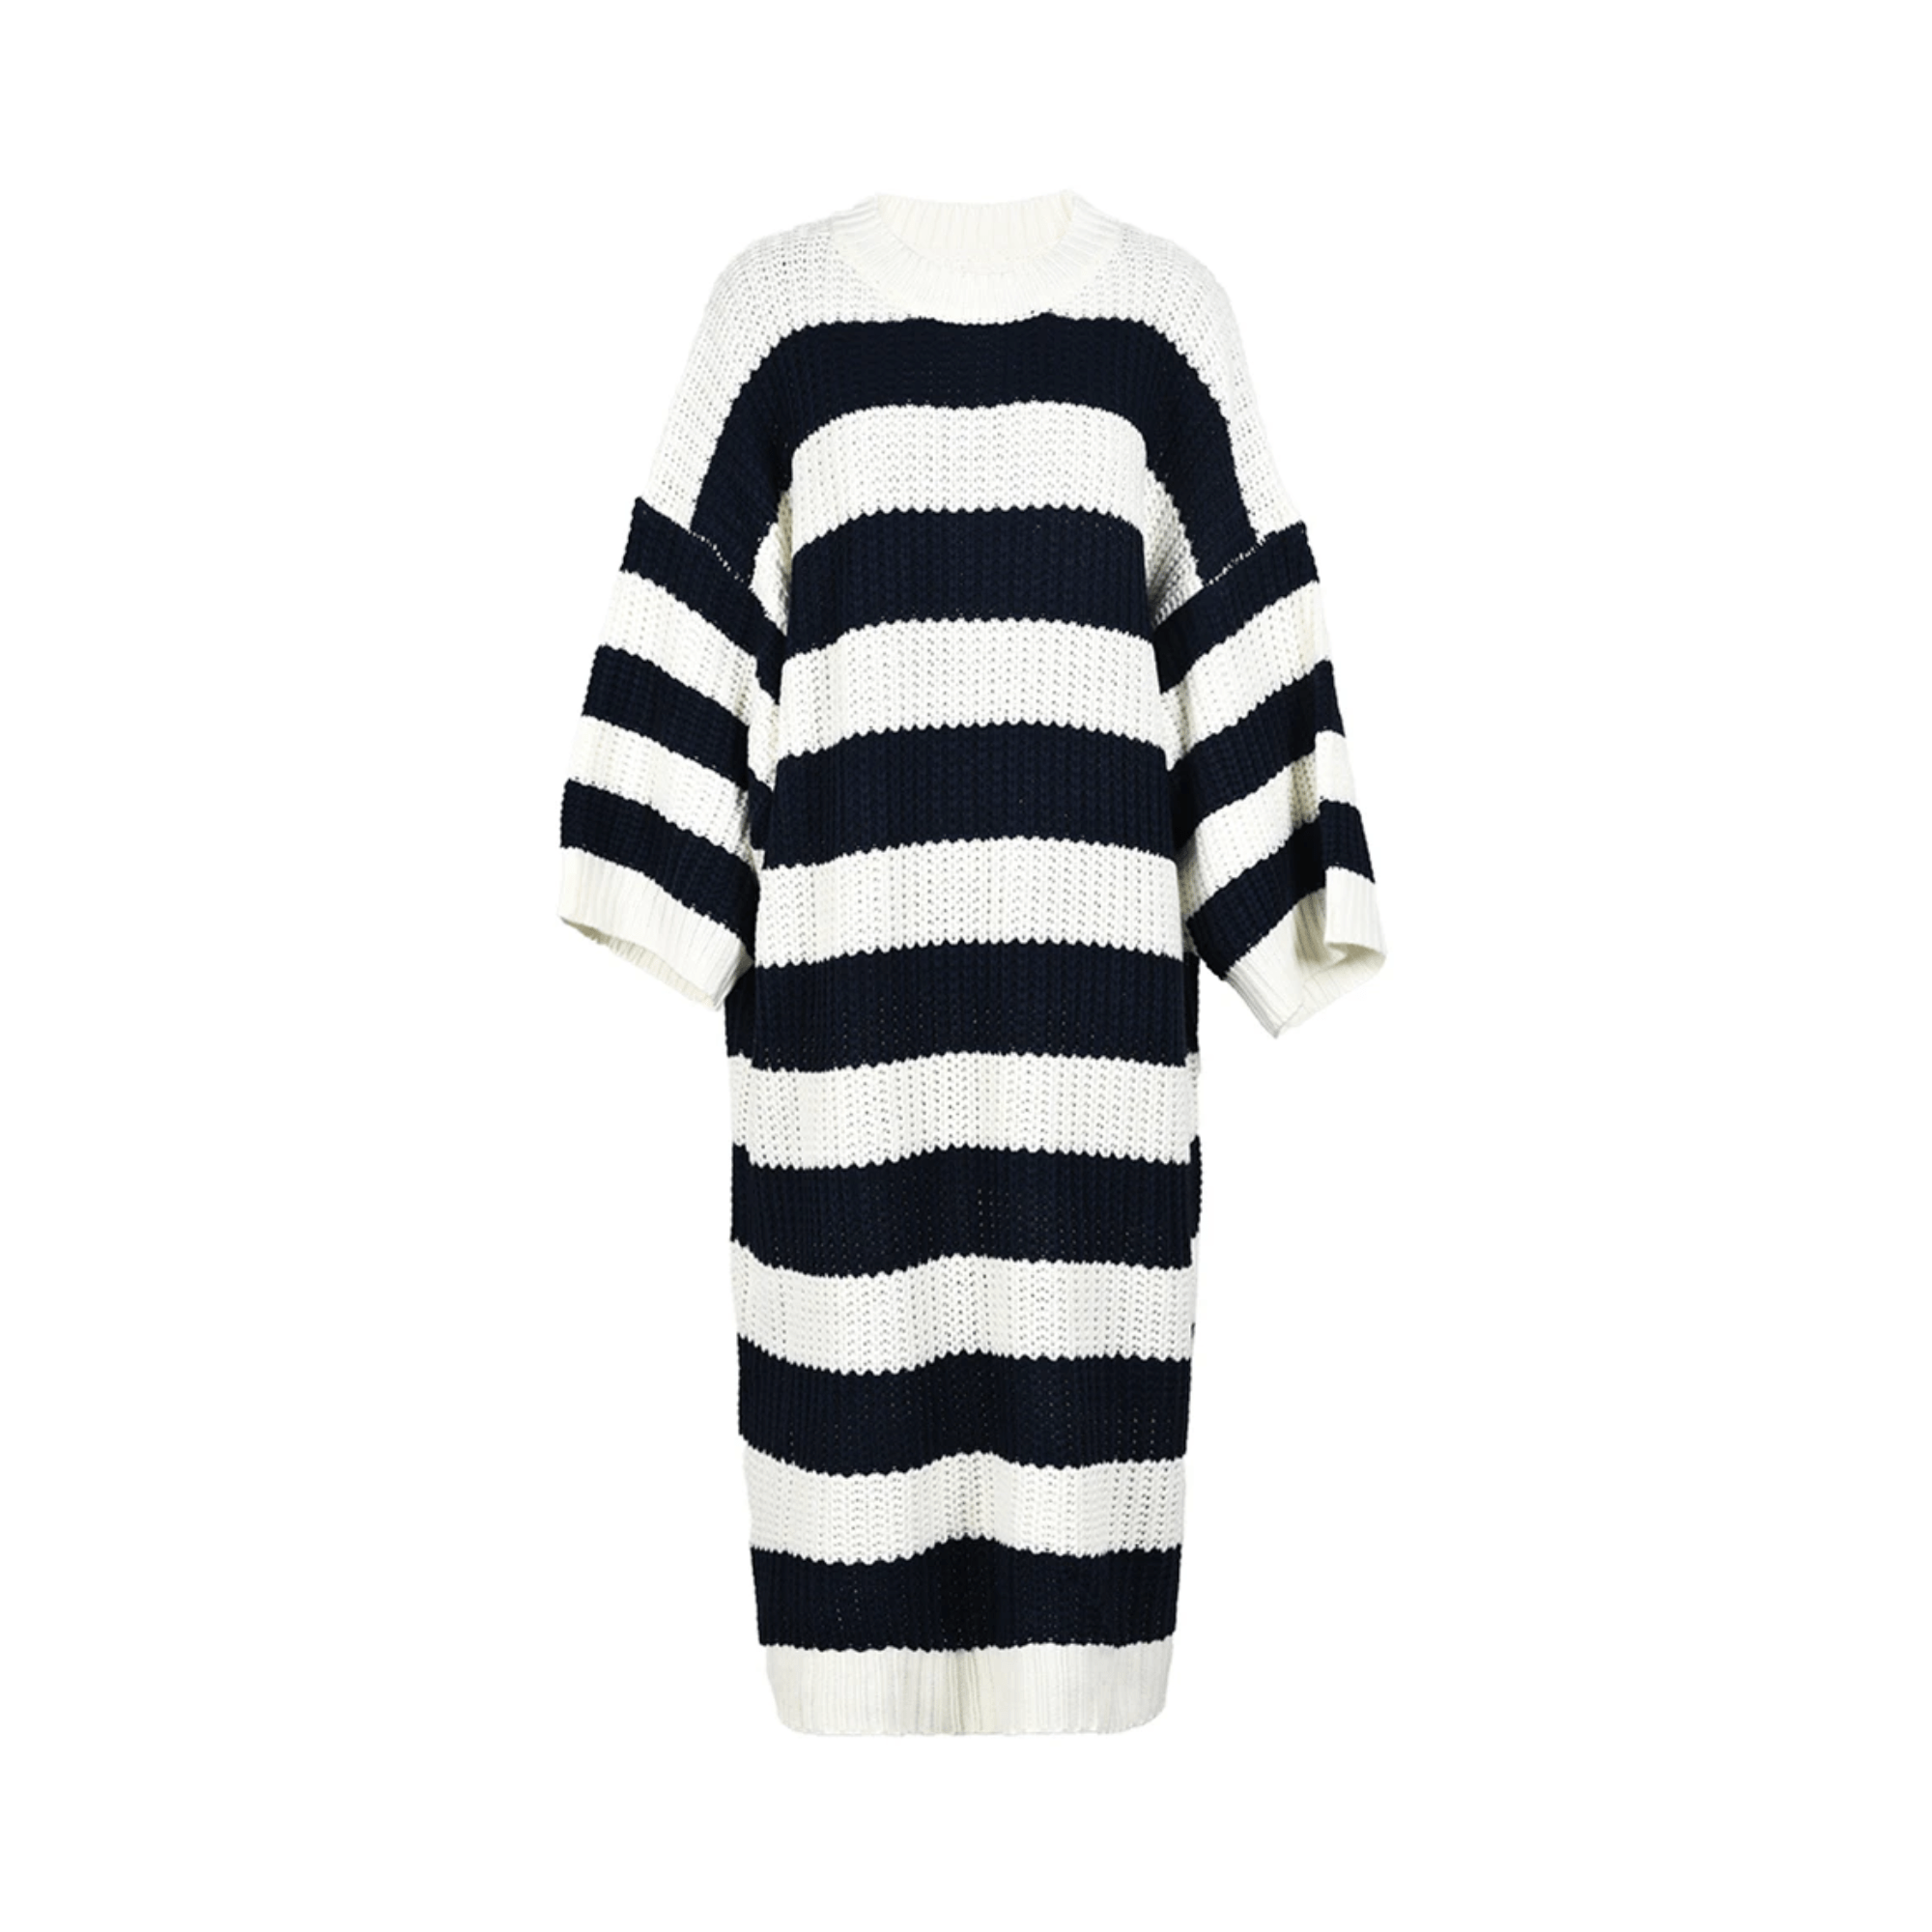 Striped Loose Knitted Dress Sweater - Kelly Obi New York